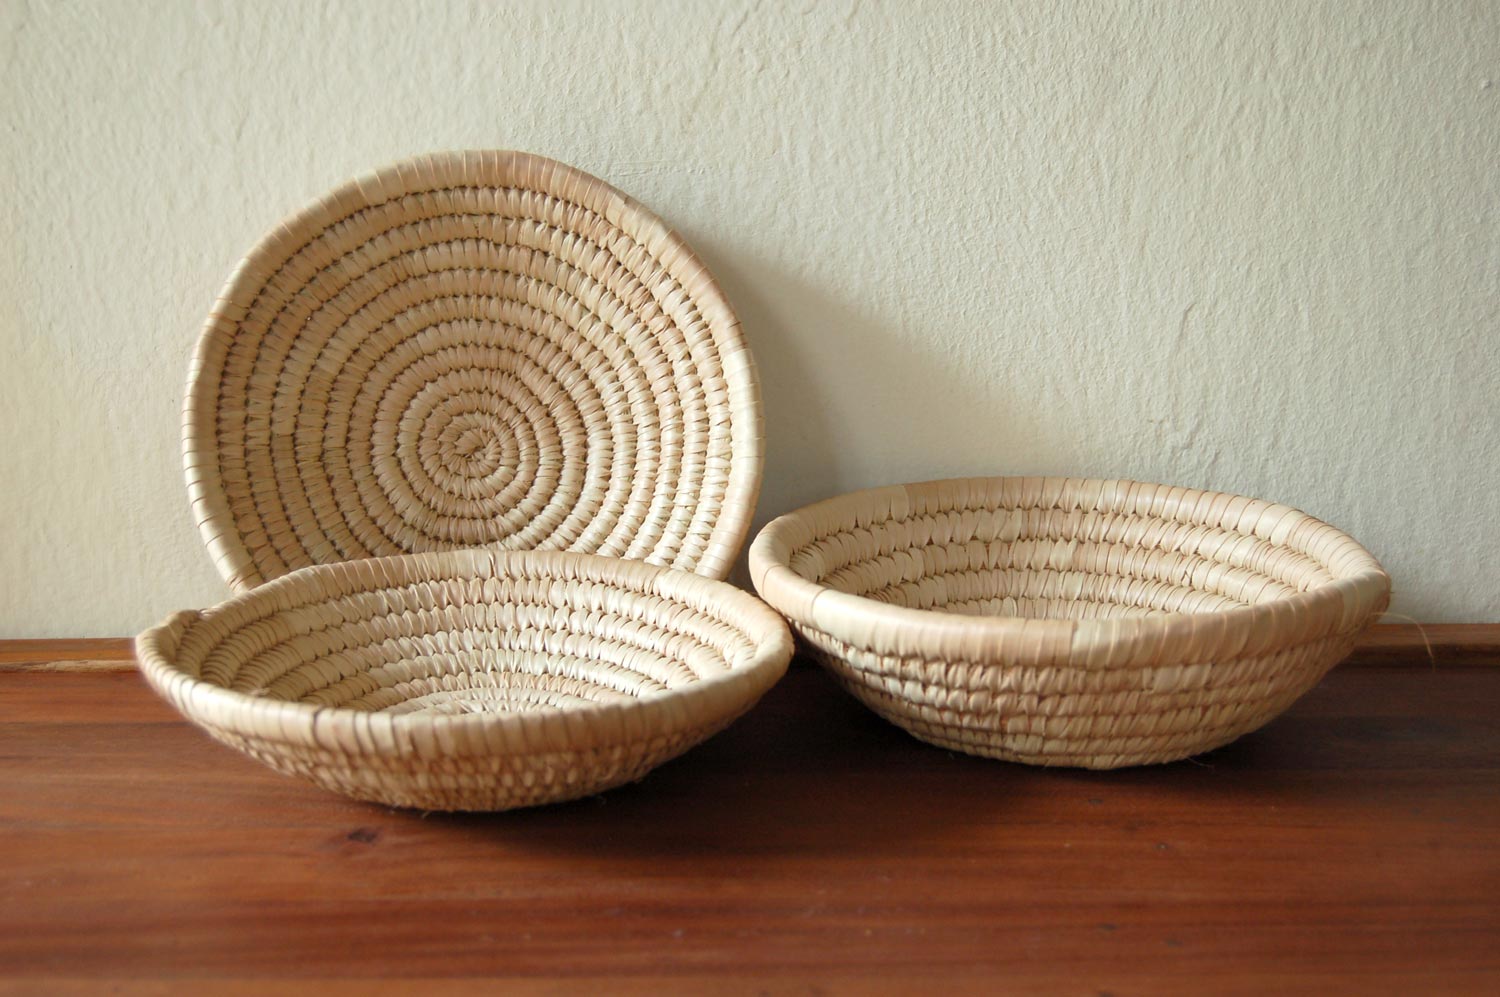 Small Basket Bowl (8-9in)